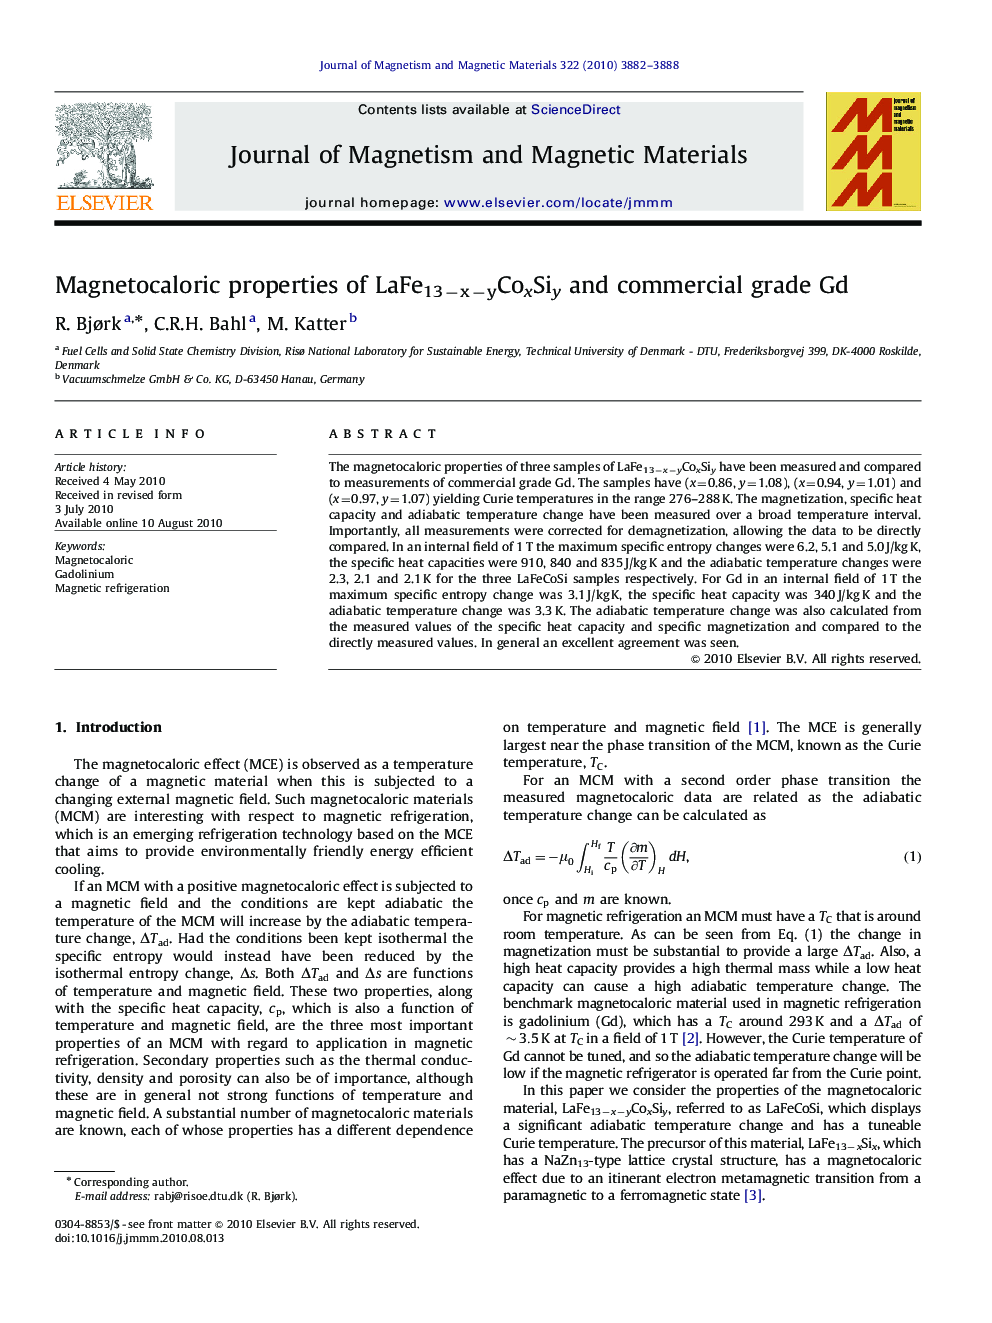 Magnetocaloric properties of LaFe13−x−yCoxSiy and commercial grade Gd